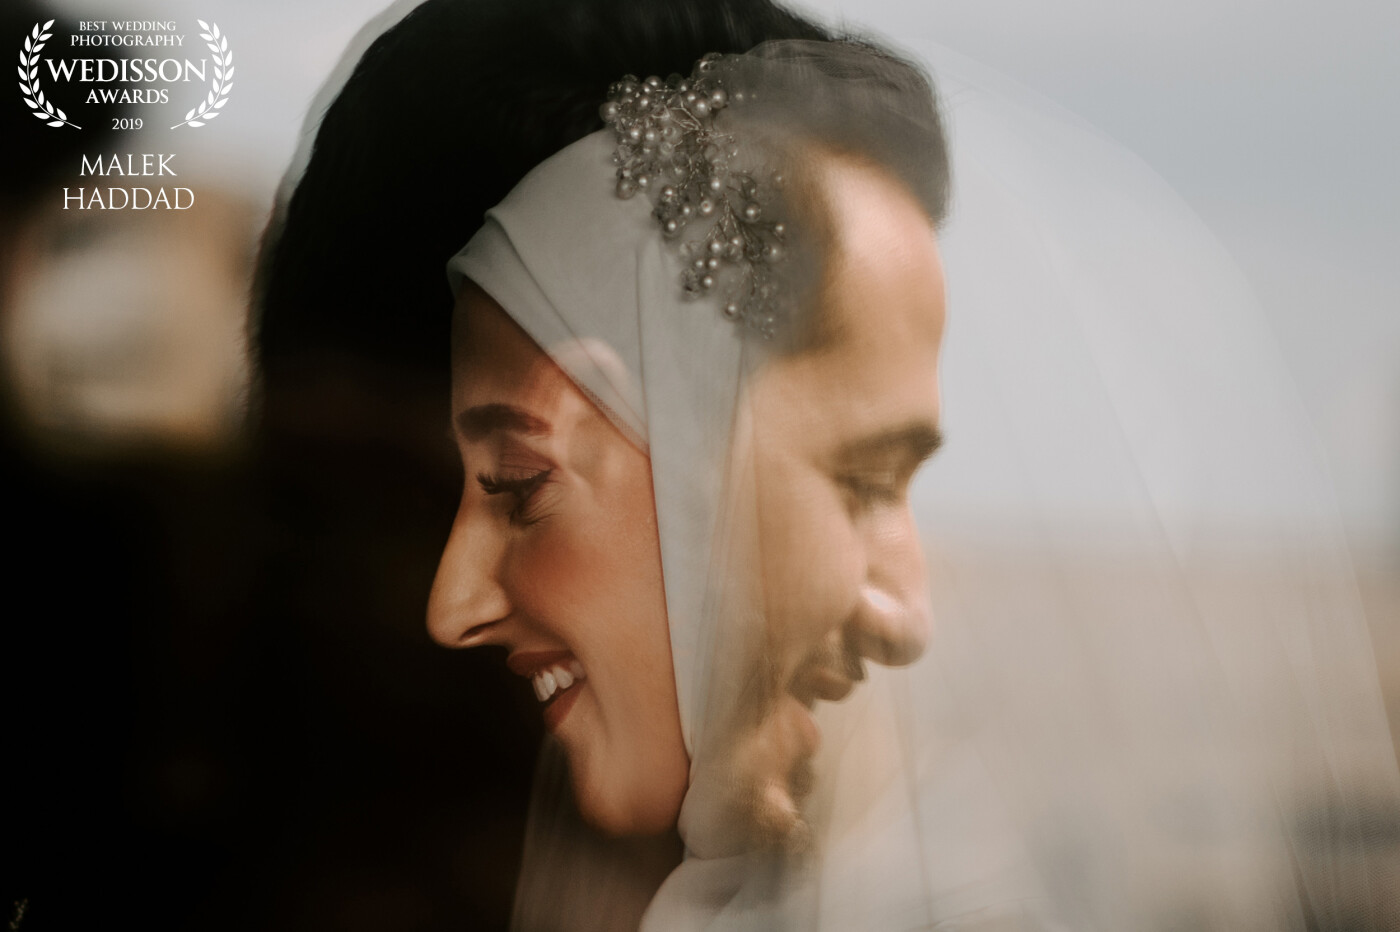 Conceptual and artistic shots are always a challenge. It is so rare to shoot something that actually speaks. With an artistic twist and a simple reflection, the groom was waiting inside for his bride. With that in mind, I was able to show the faces of two people who became one that day.